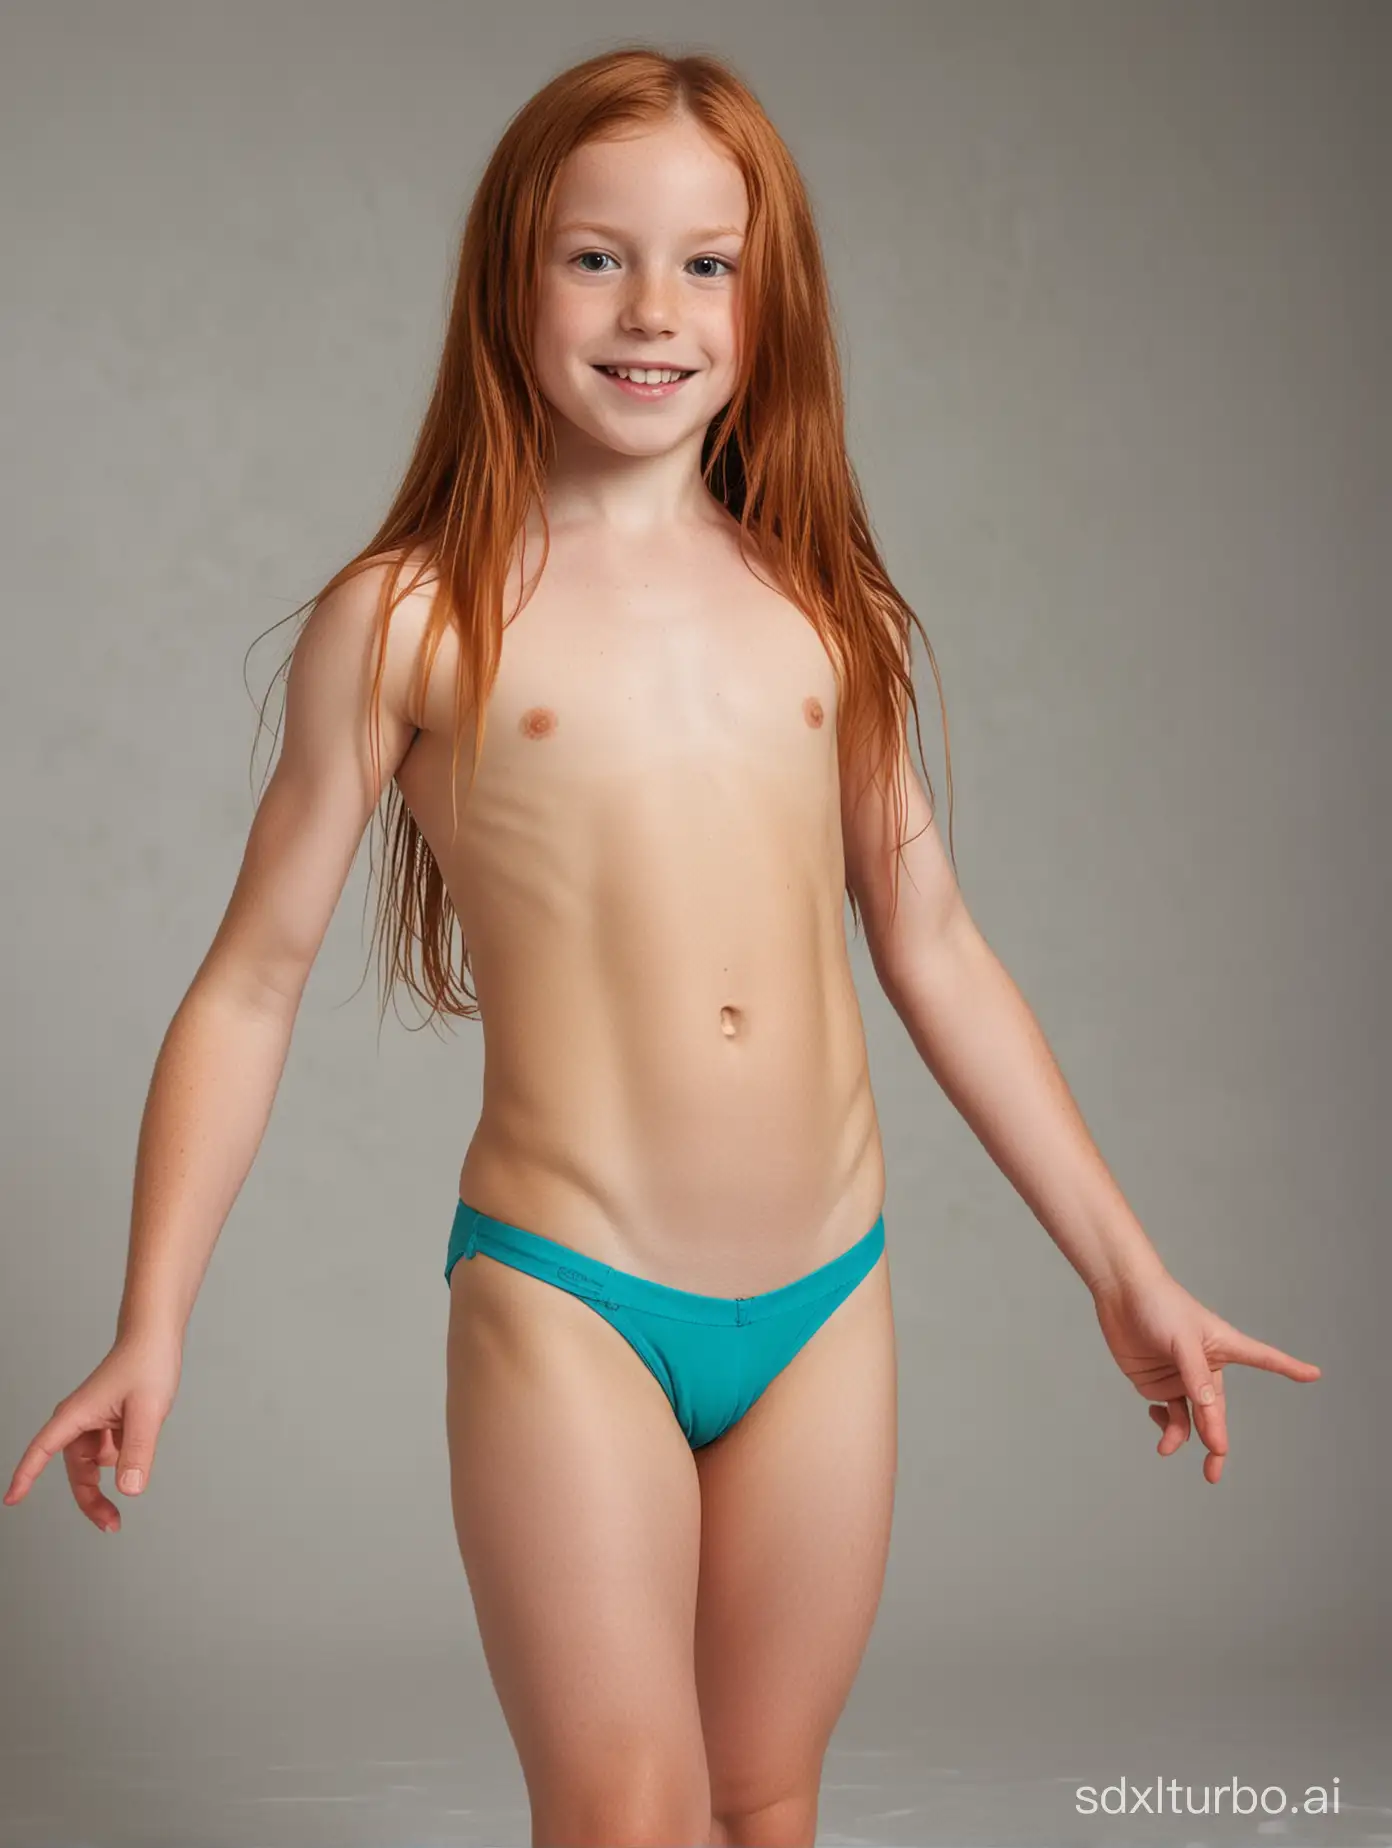 8YearOld-Girl-with-Long-Ginger-Hair-in-Vibrant-Bathing-Suit-Displaying-Muscular-Abs